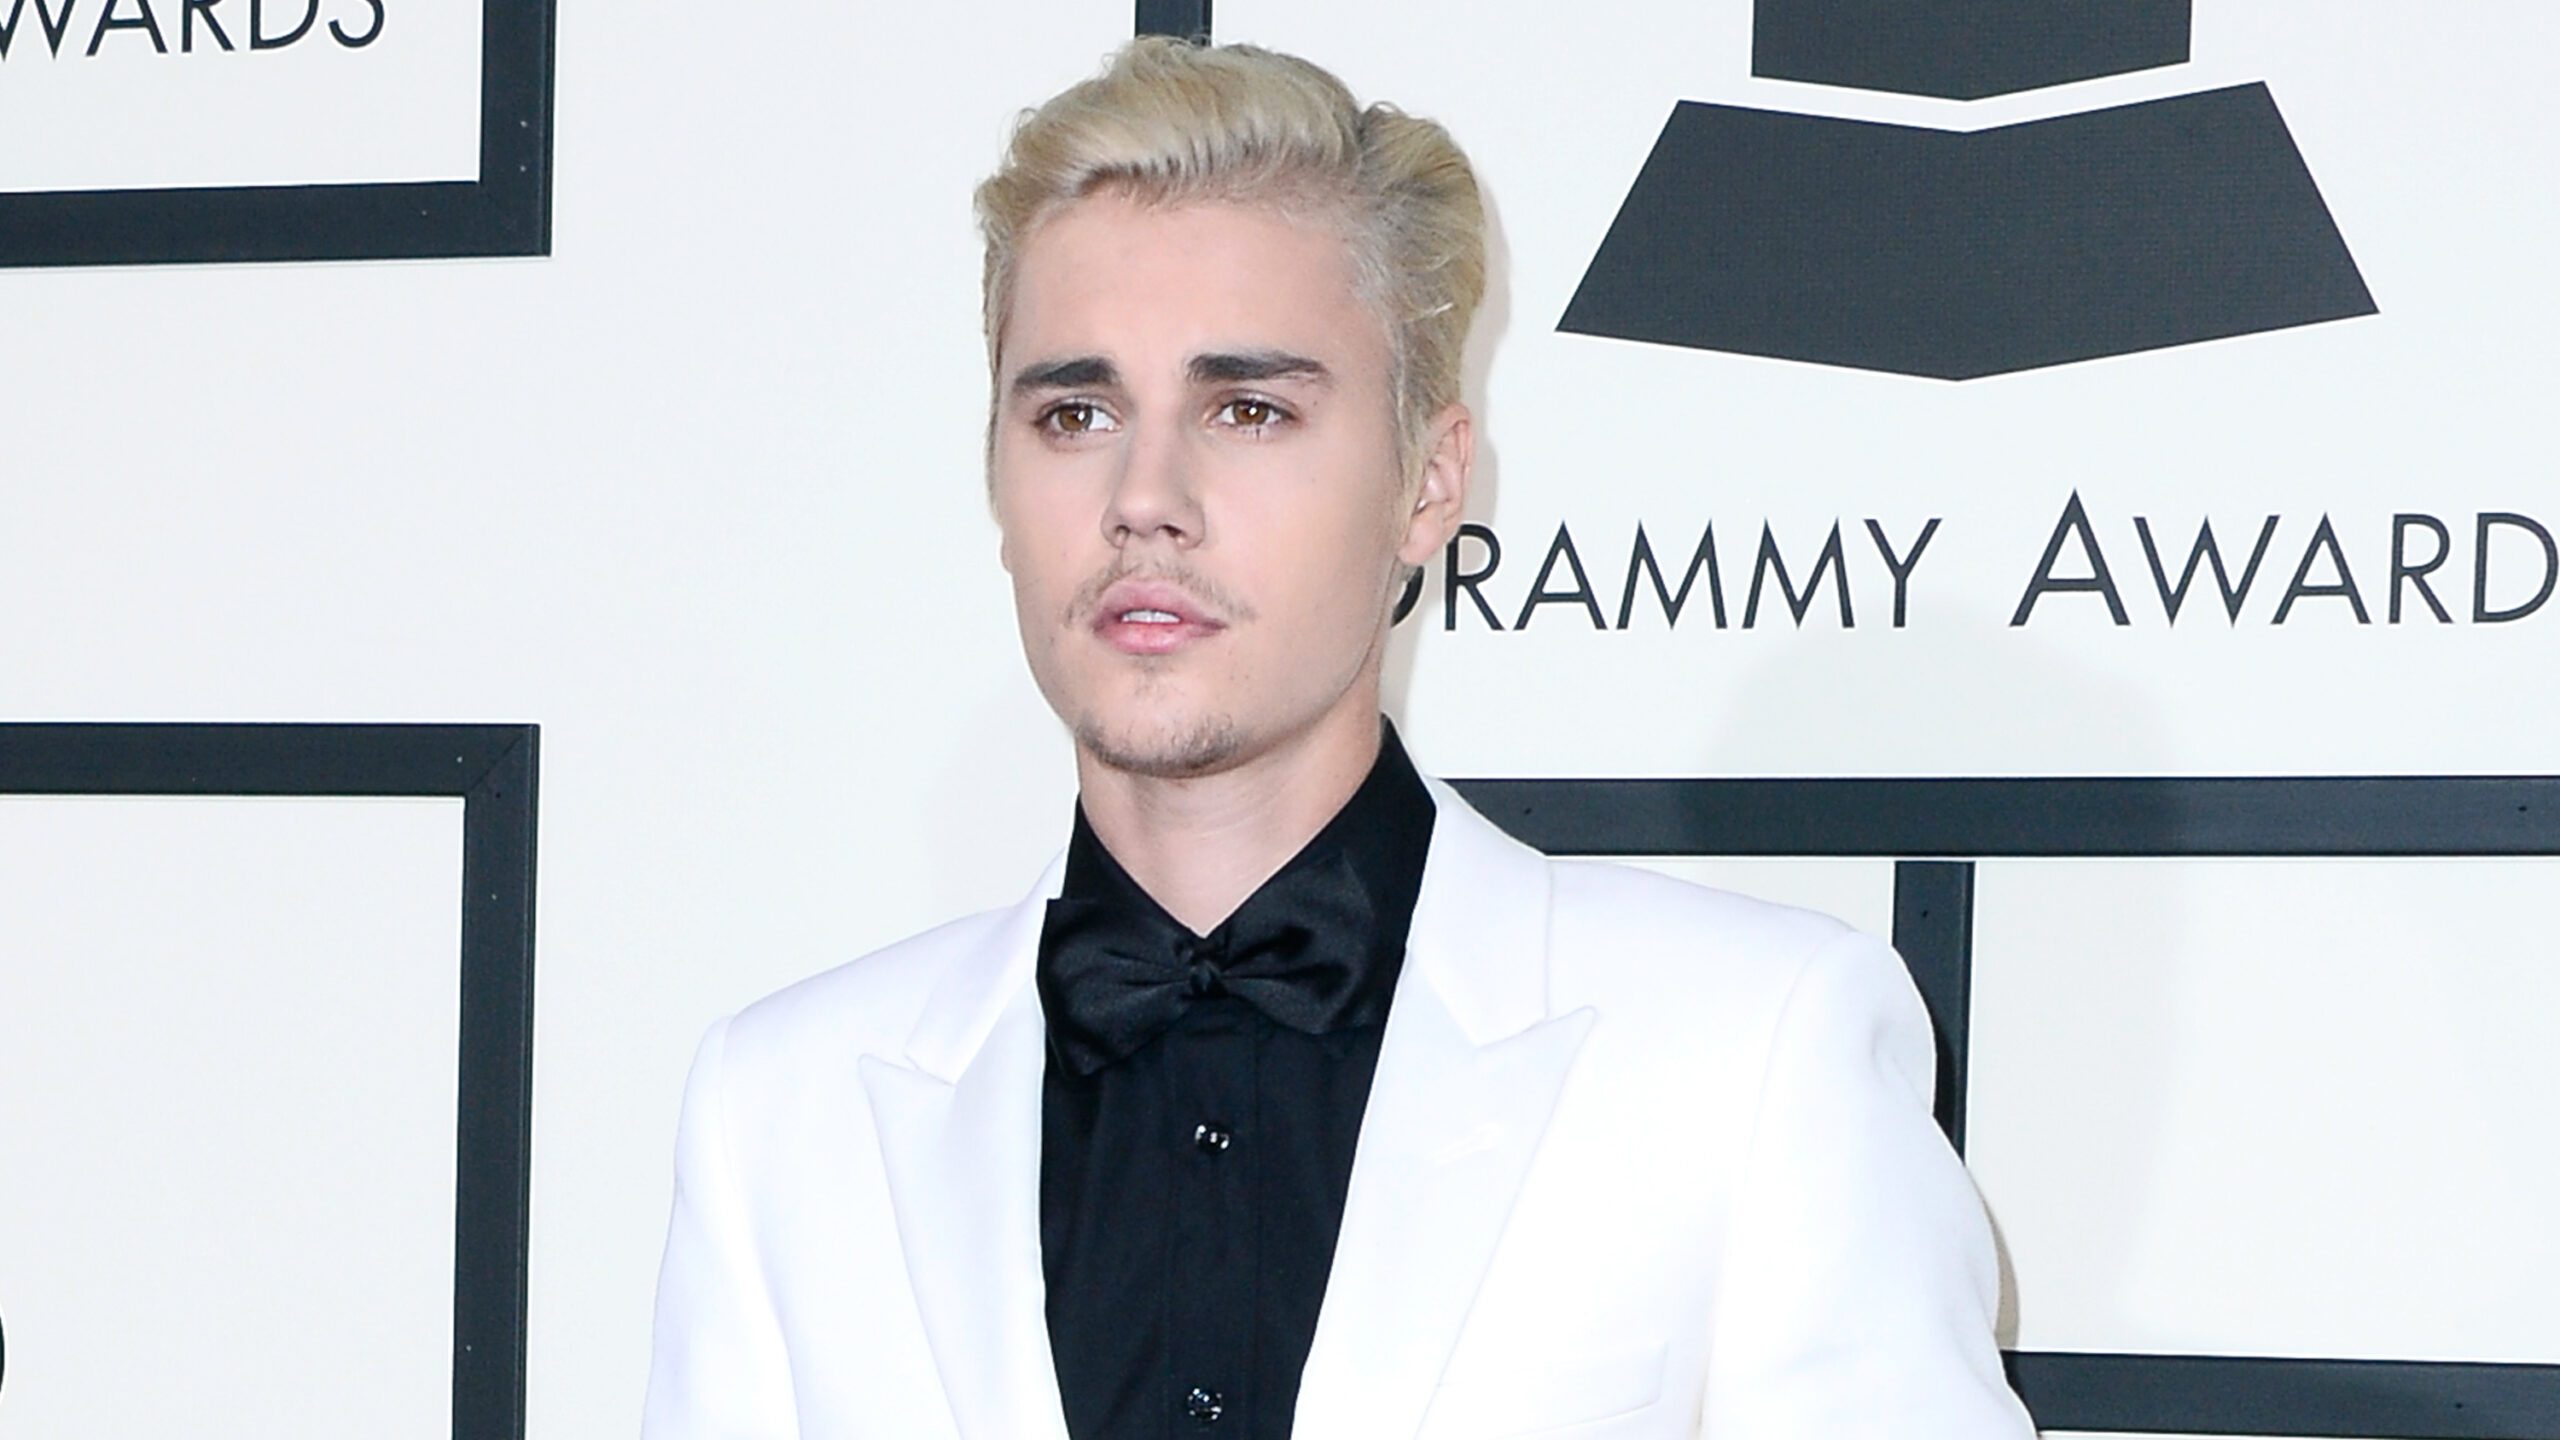 Justin Bieber hit with ‘Sorry’ copyright suit